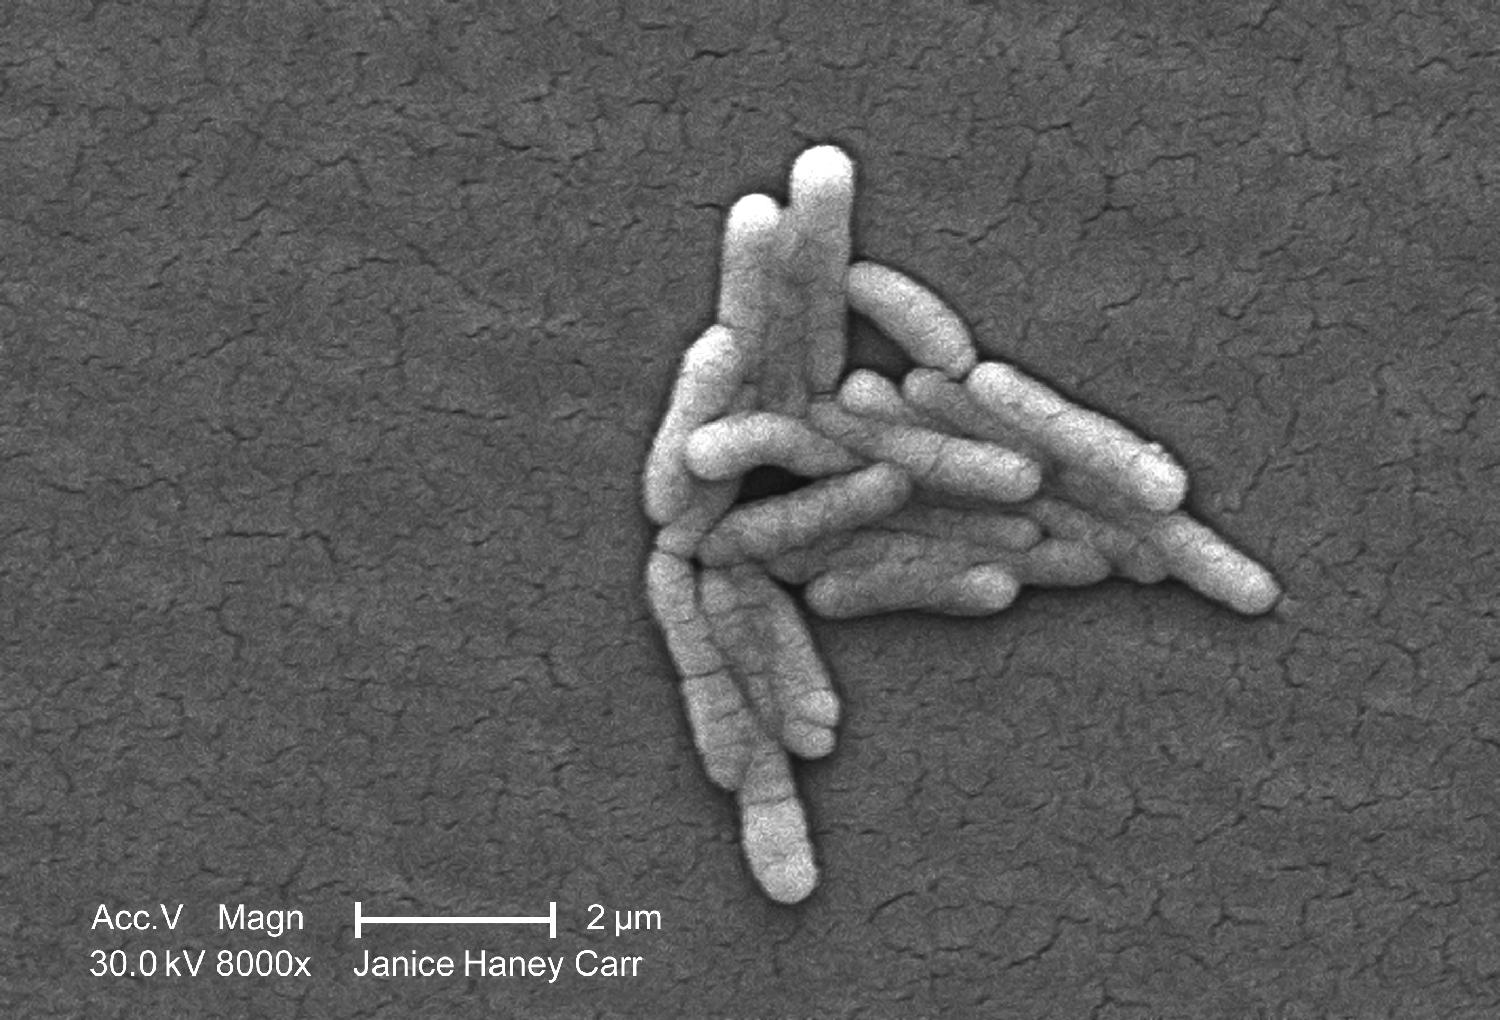 Scanning electron microscopic (SEM) of Salmonella enterica bacteria. Copyright holder: Janice Haney Carr. Link: https://phil.cdc.gov/Details.aspx?pid=10986.